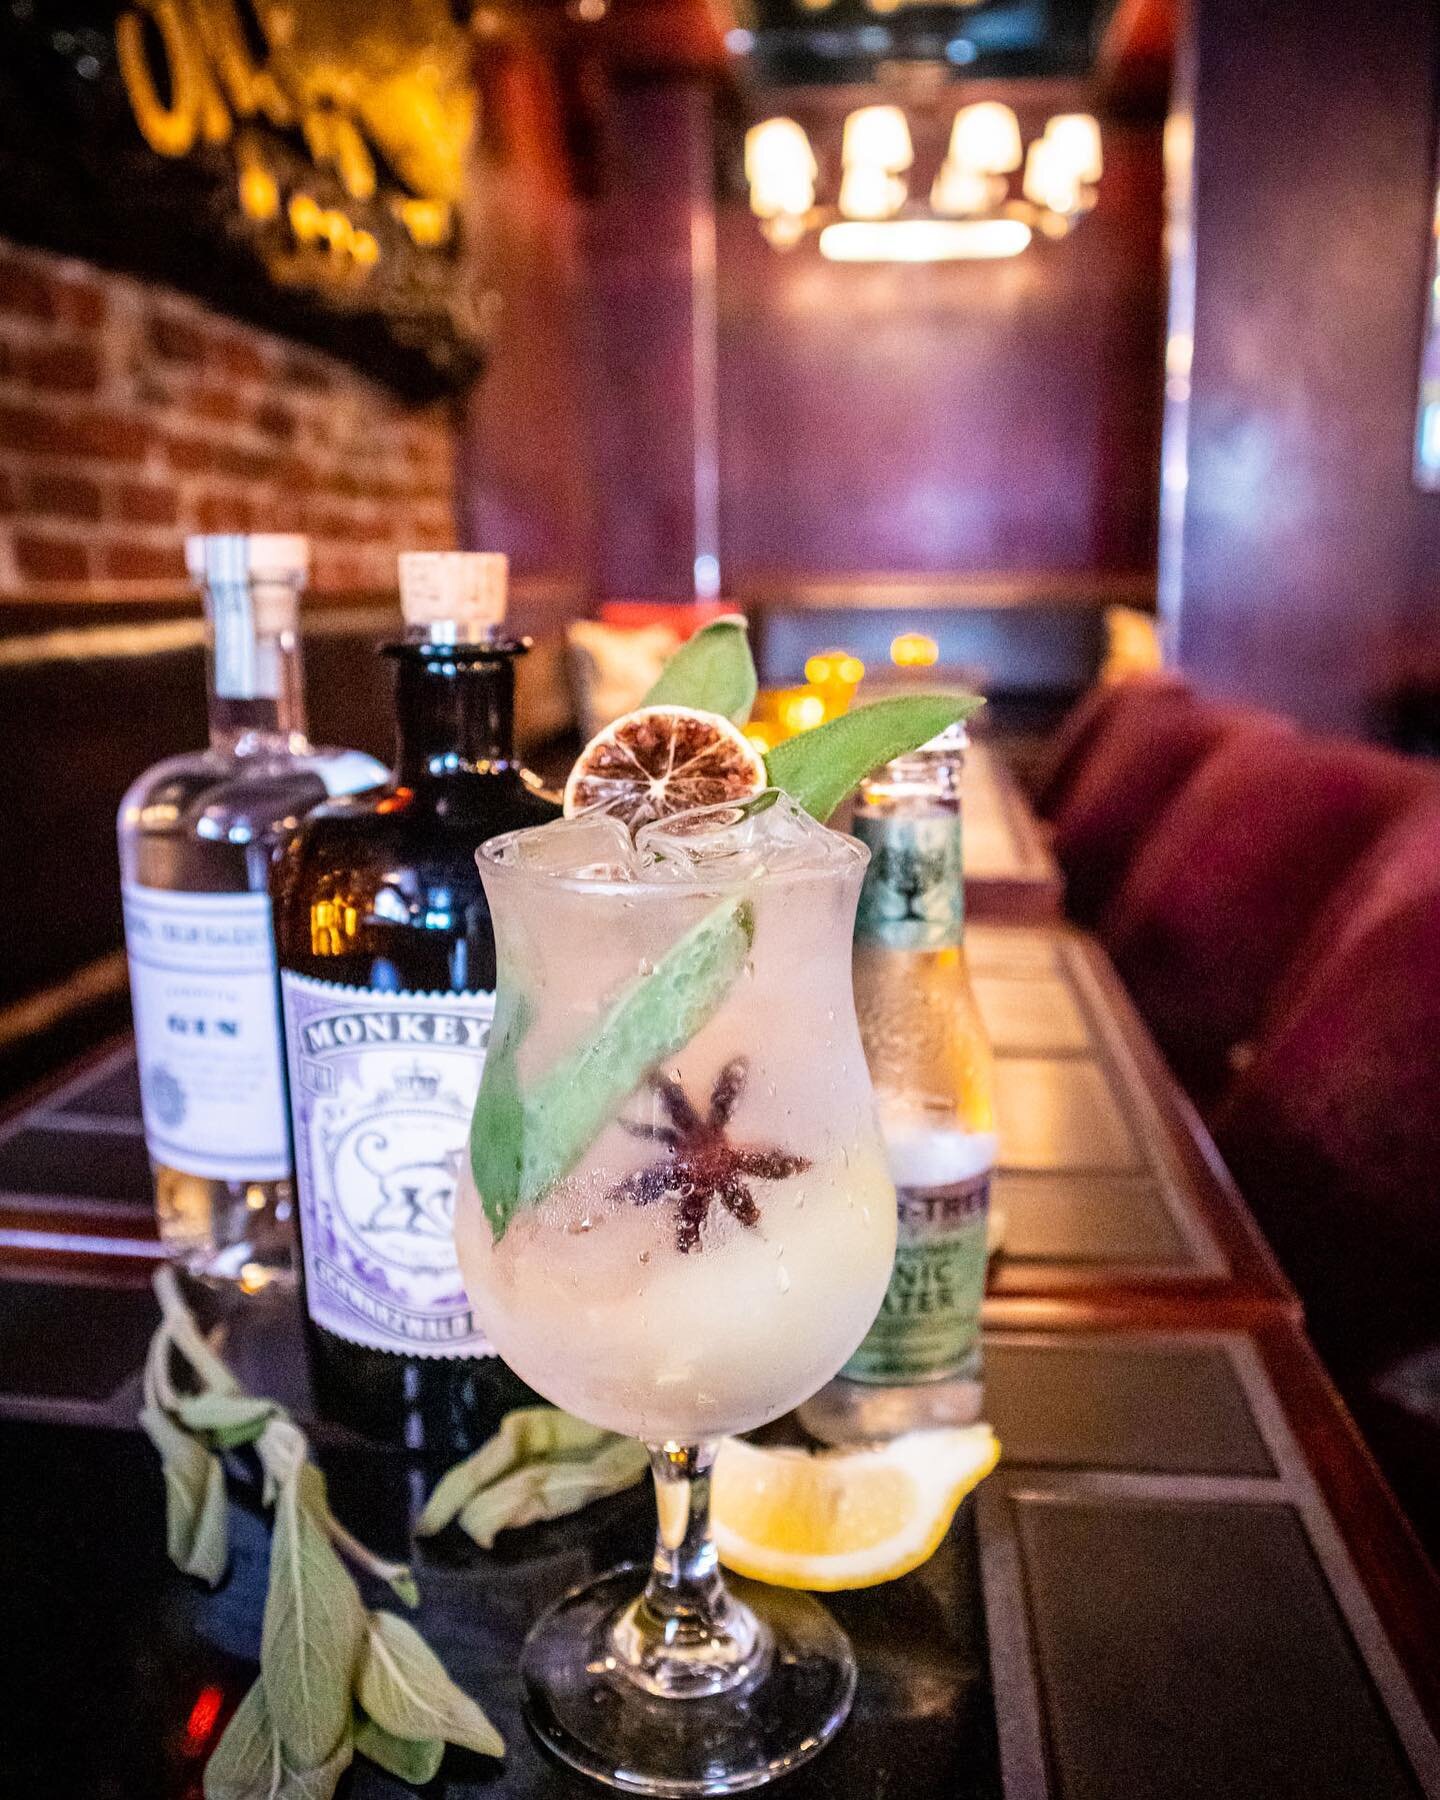 Whoo&rsquo;s thirsty? 🦉 
&bull;
&bull;
&bull;
#owltree #owlnest #cocktails #drinks #sf #sanfrancisco #california #gintonic #lounge #cocktailbar #bar #bartender